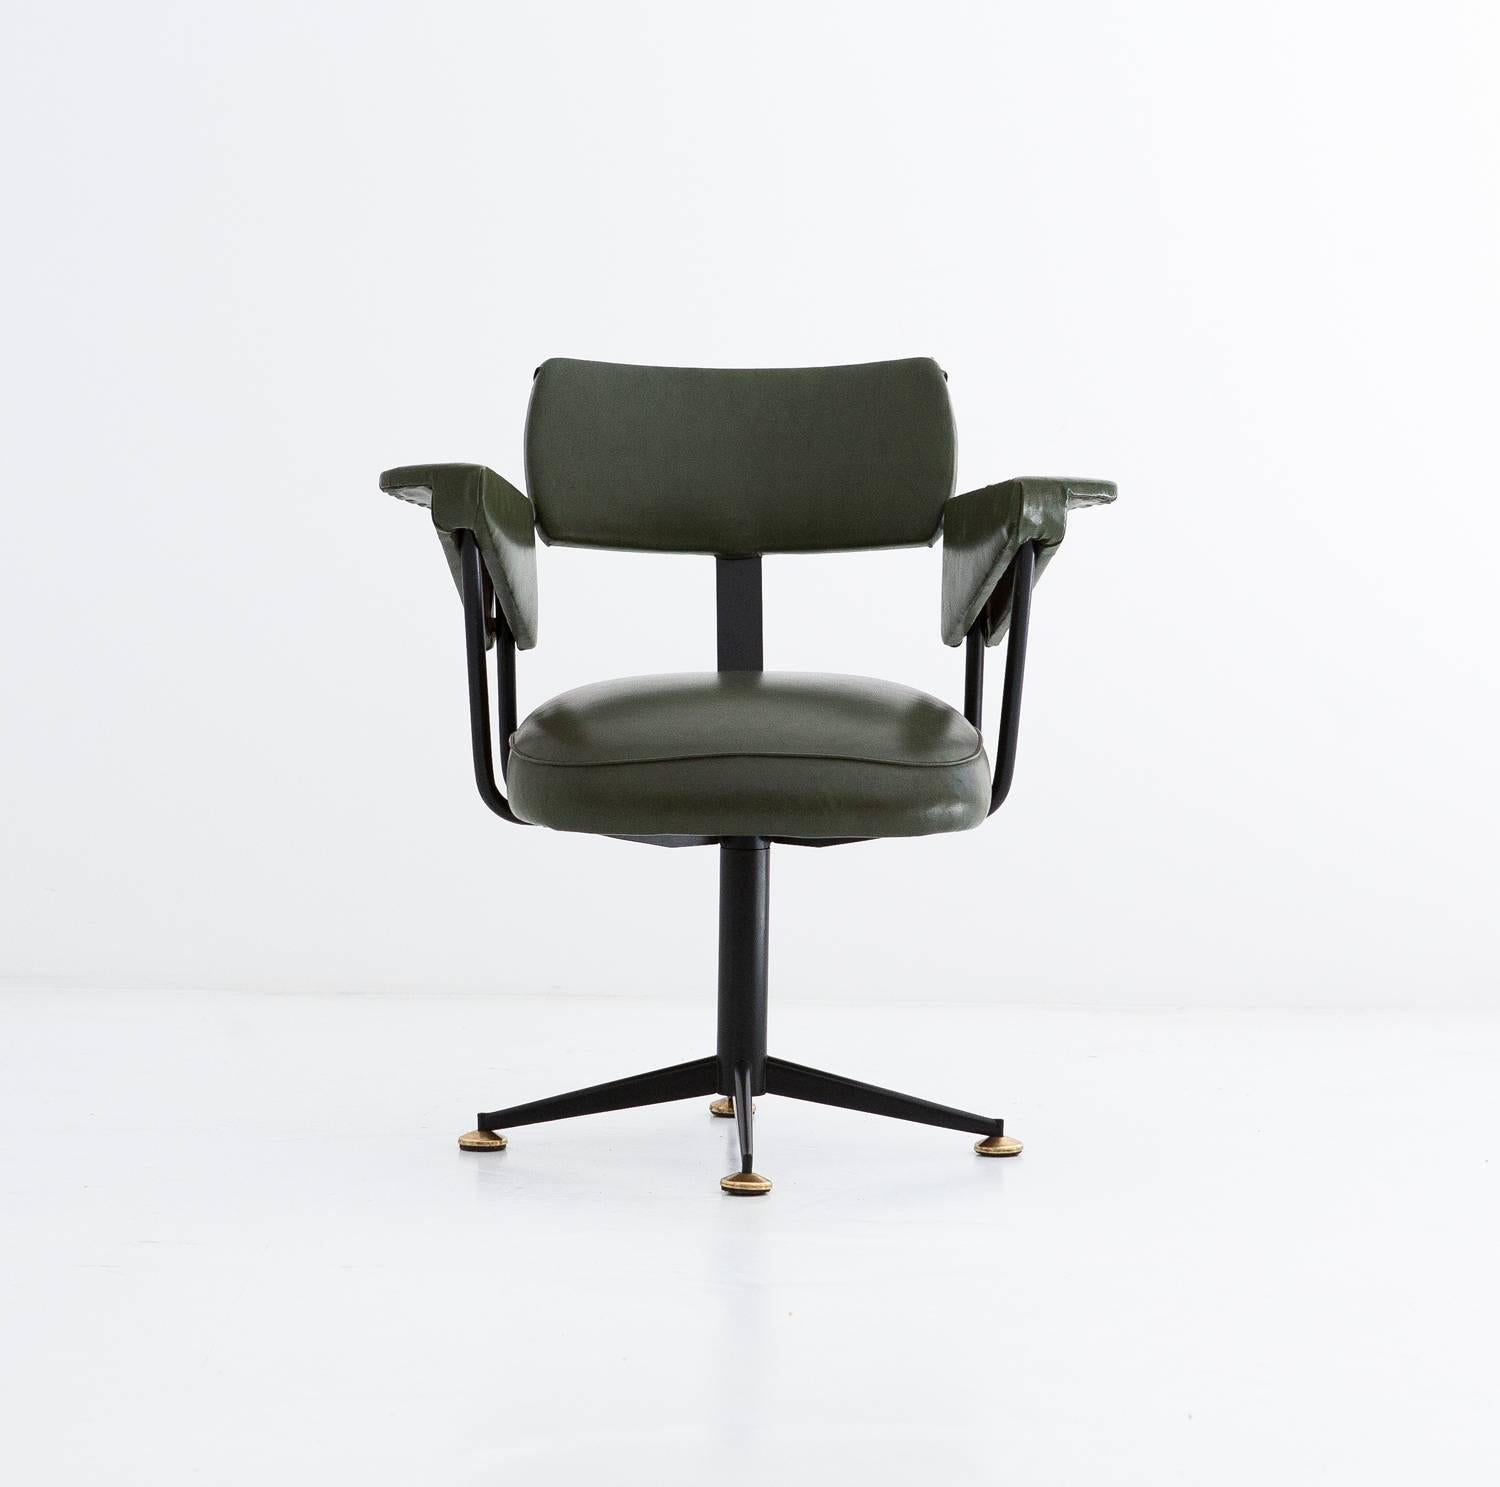 A modern Swivel armchair designed and produced in Italy in the 1950's
Iron and wood frame with brass feets
Original bottle green skai upholstery
The iron frame has been restored with new black lacquer.